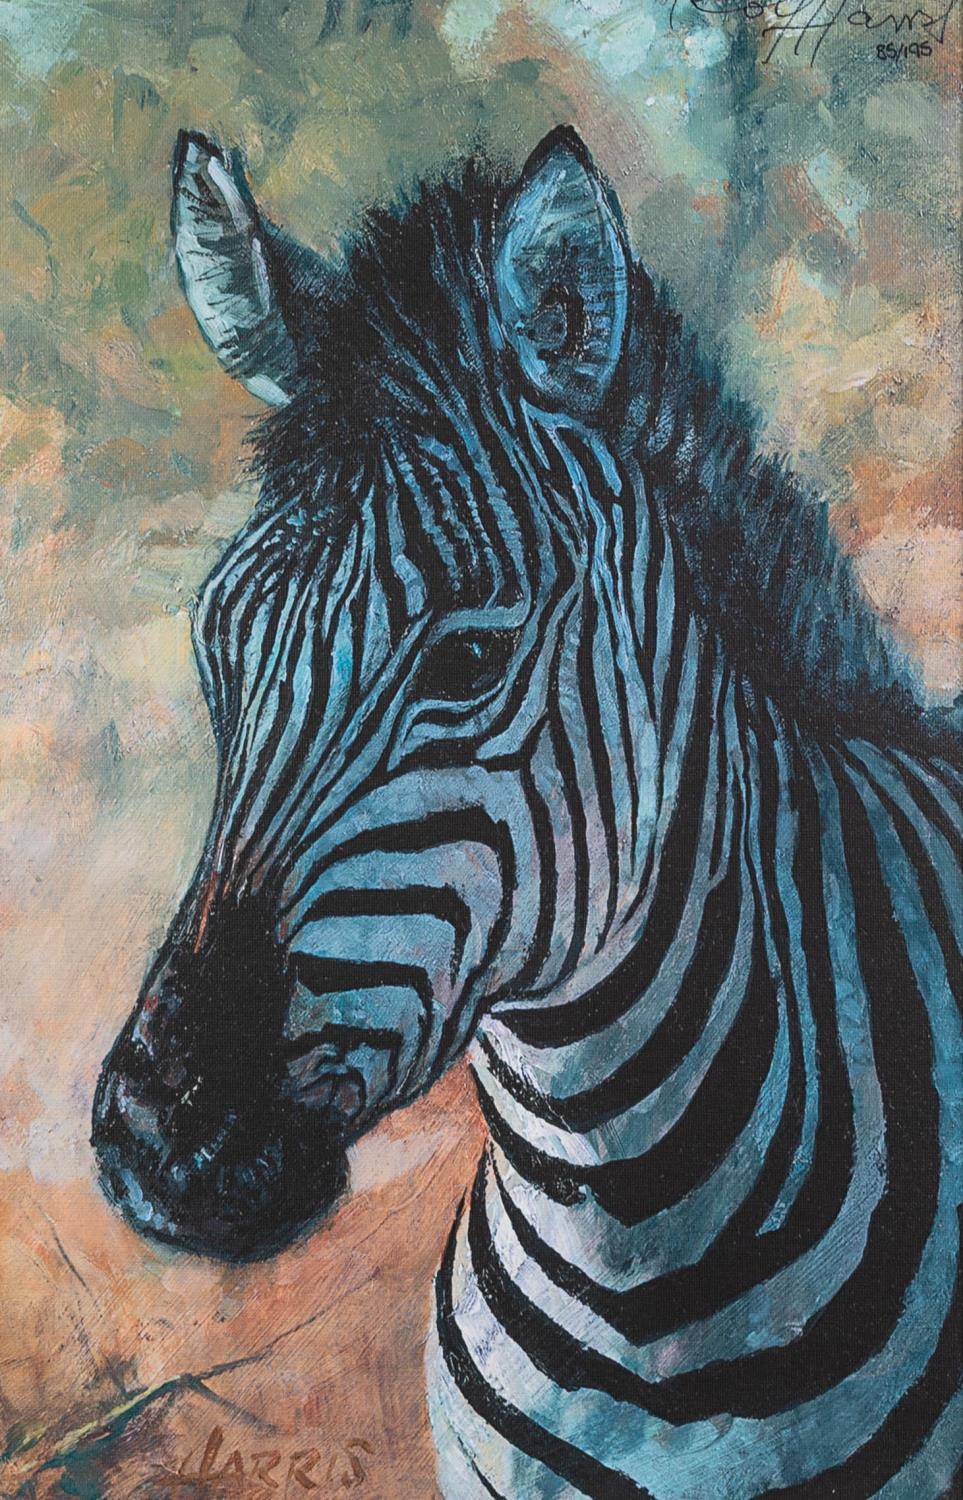 ROLF HARRIS (b. 1930) ARTIST SIGNED LIMITED EDITION COLOUR PRINT ON CANVAS ?Young Zebra?, (85/